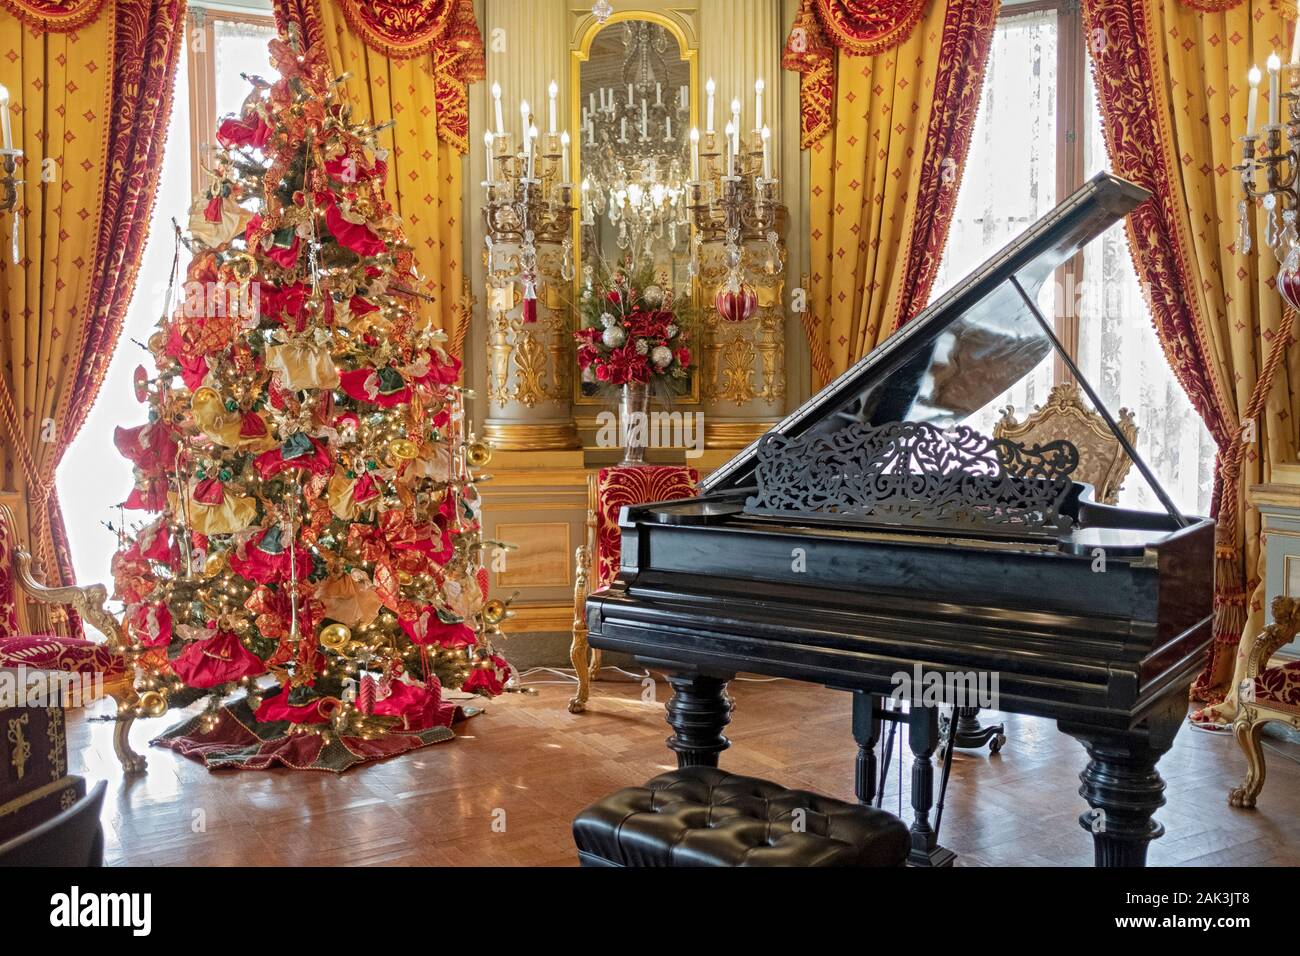 A beautifully decorated Christmas tree in the Music Room on the second floor of the Breakers mansion in Newport, Rhode Island. Stock Photo